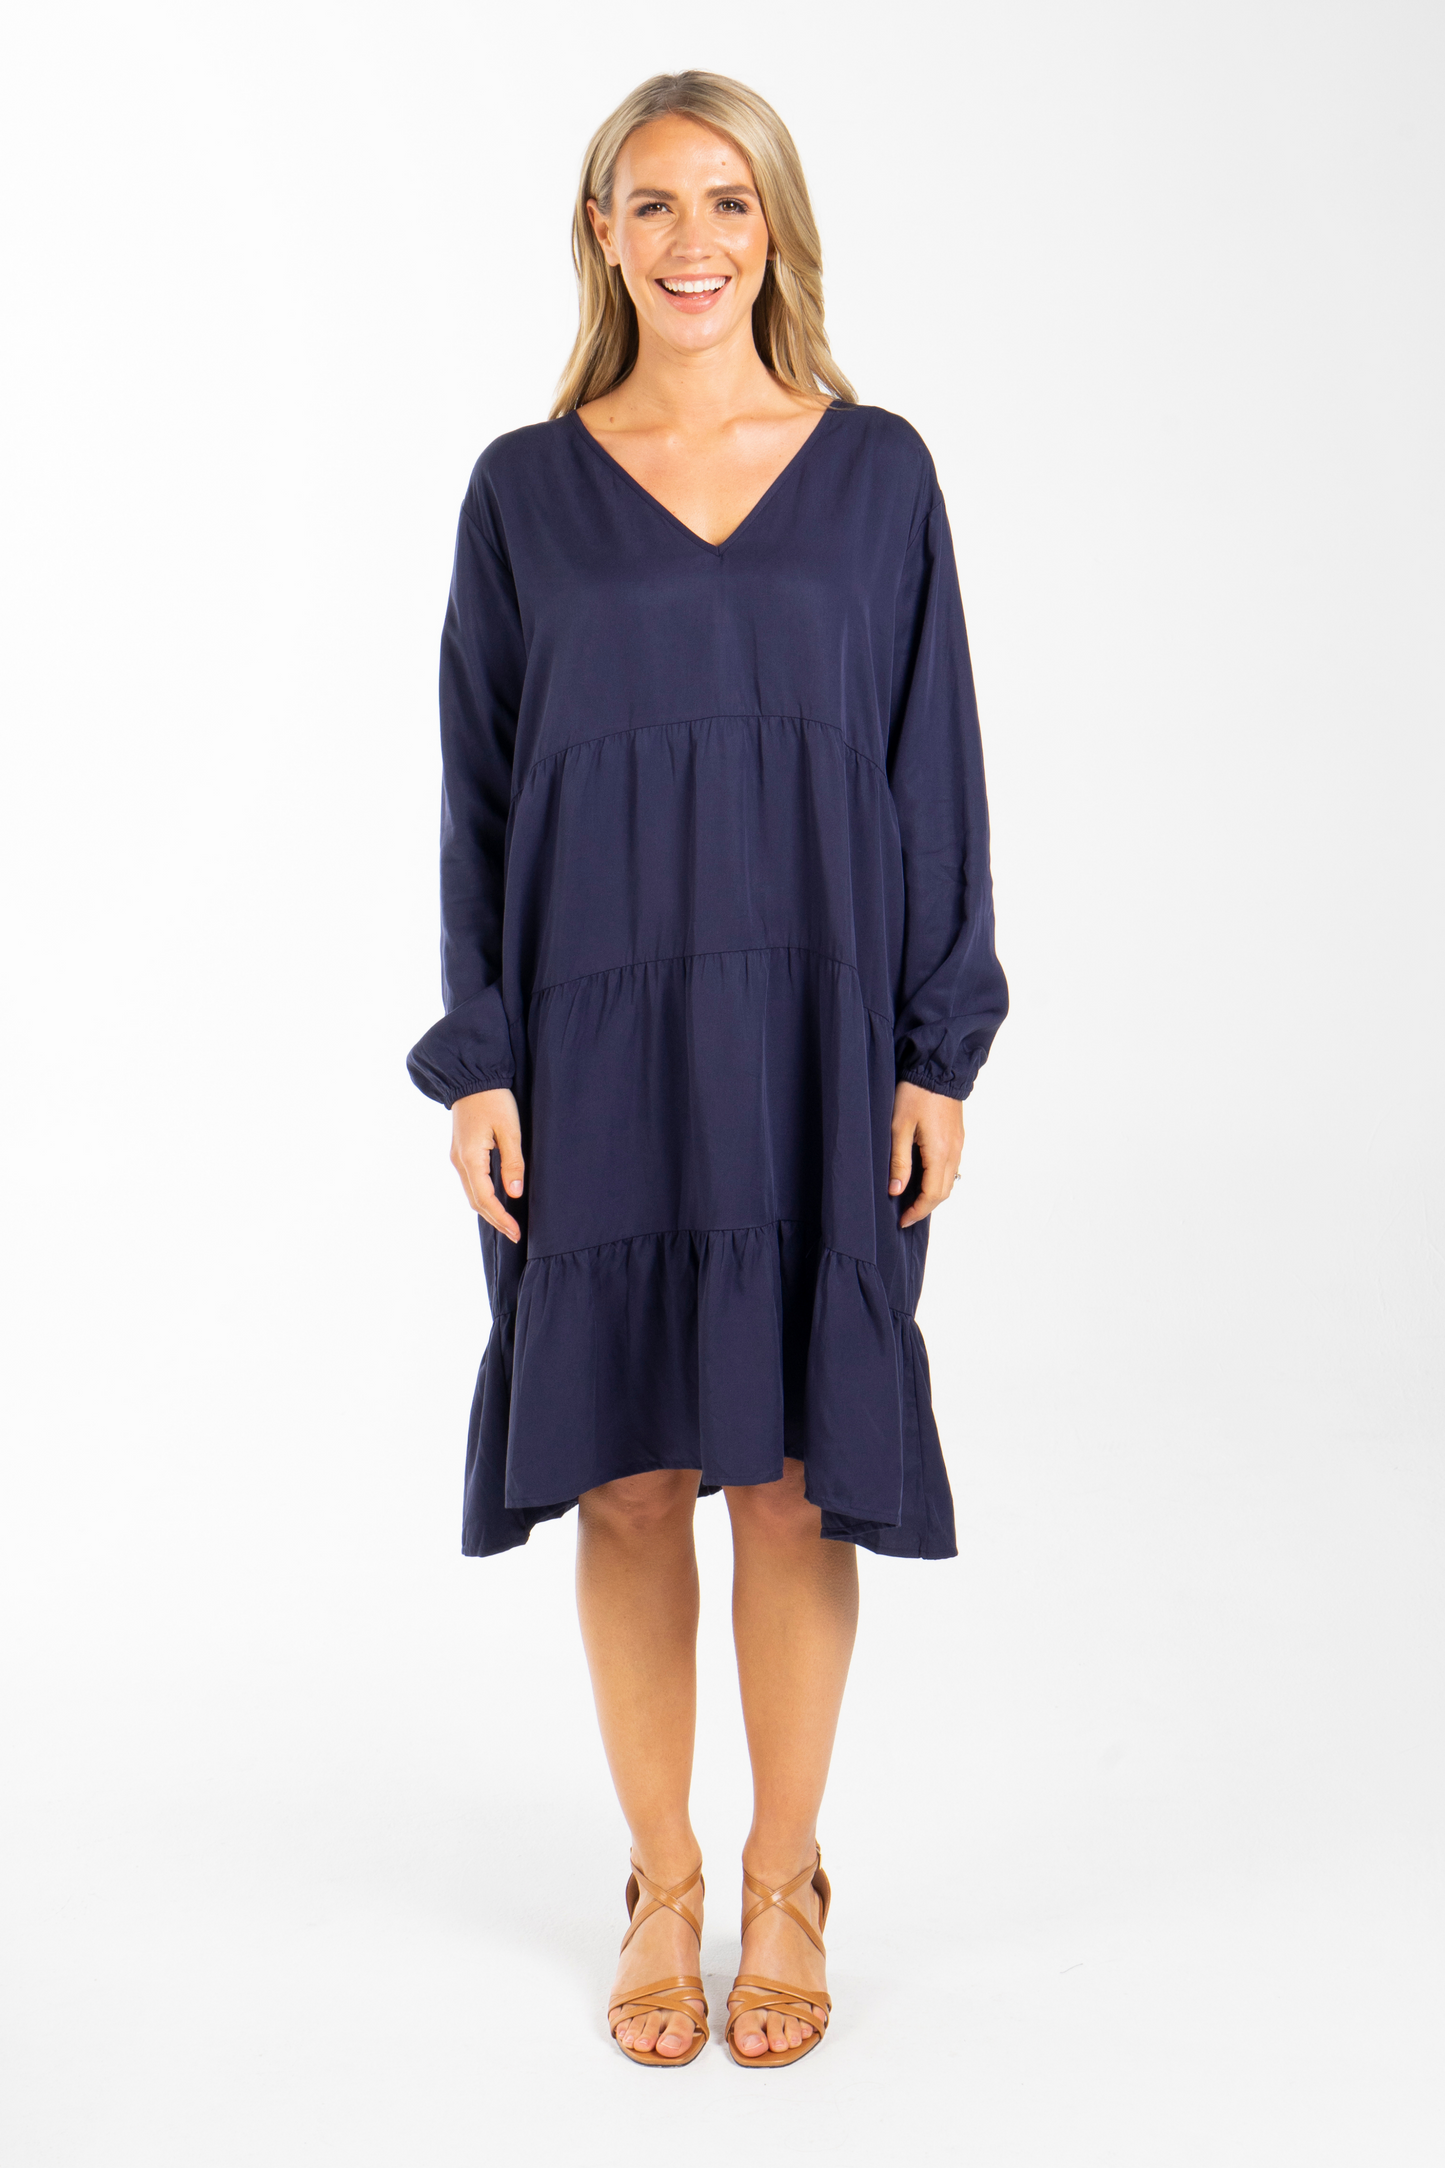 Long Sleeve Chic Dress in Navy